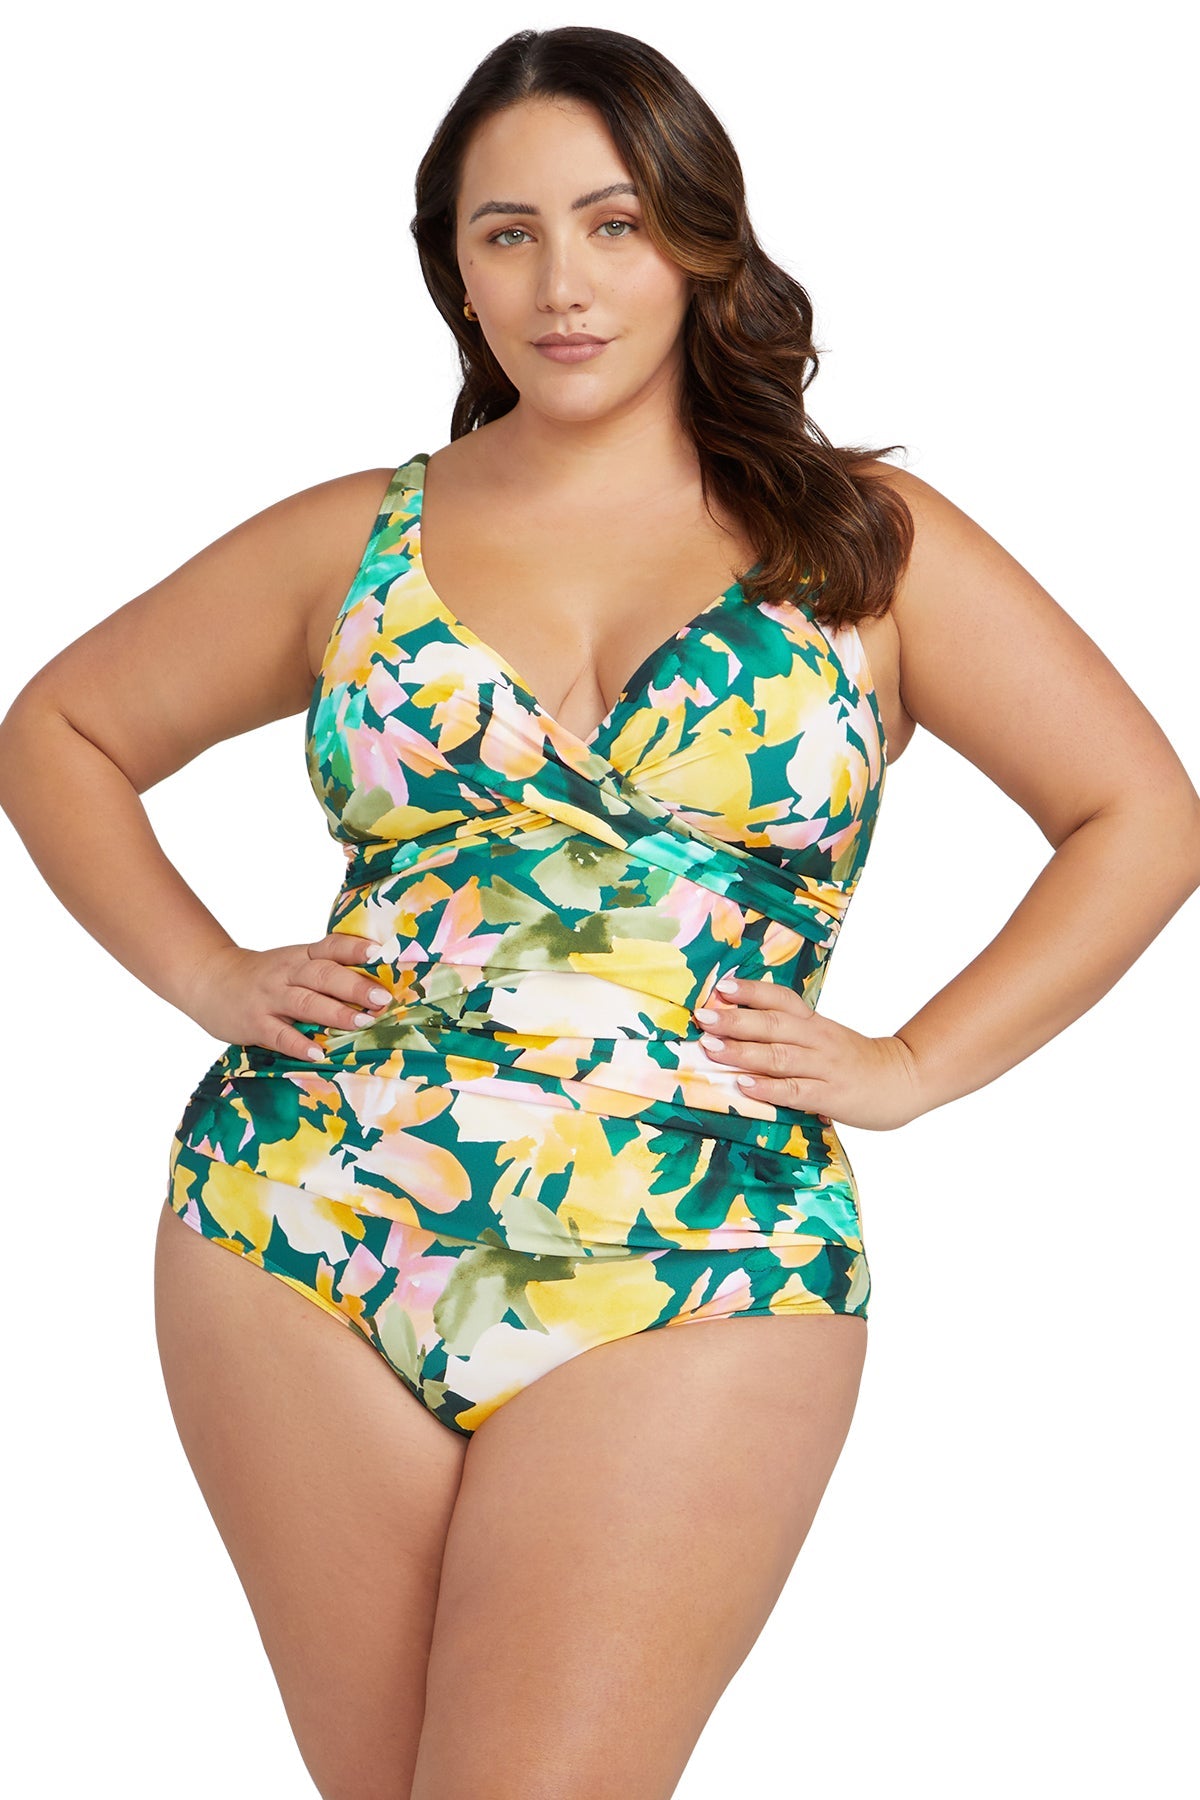 Welcome Artesand Swimwear! NEW size 12-24 swimsuits in C-G cups